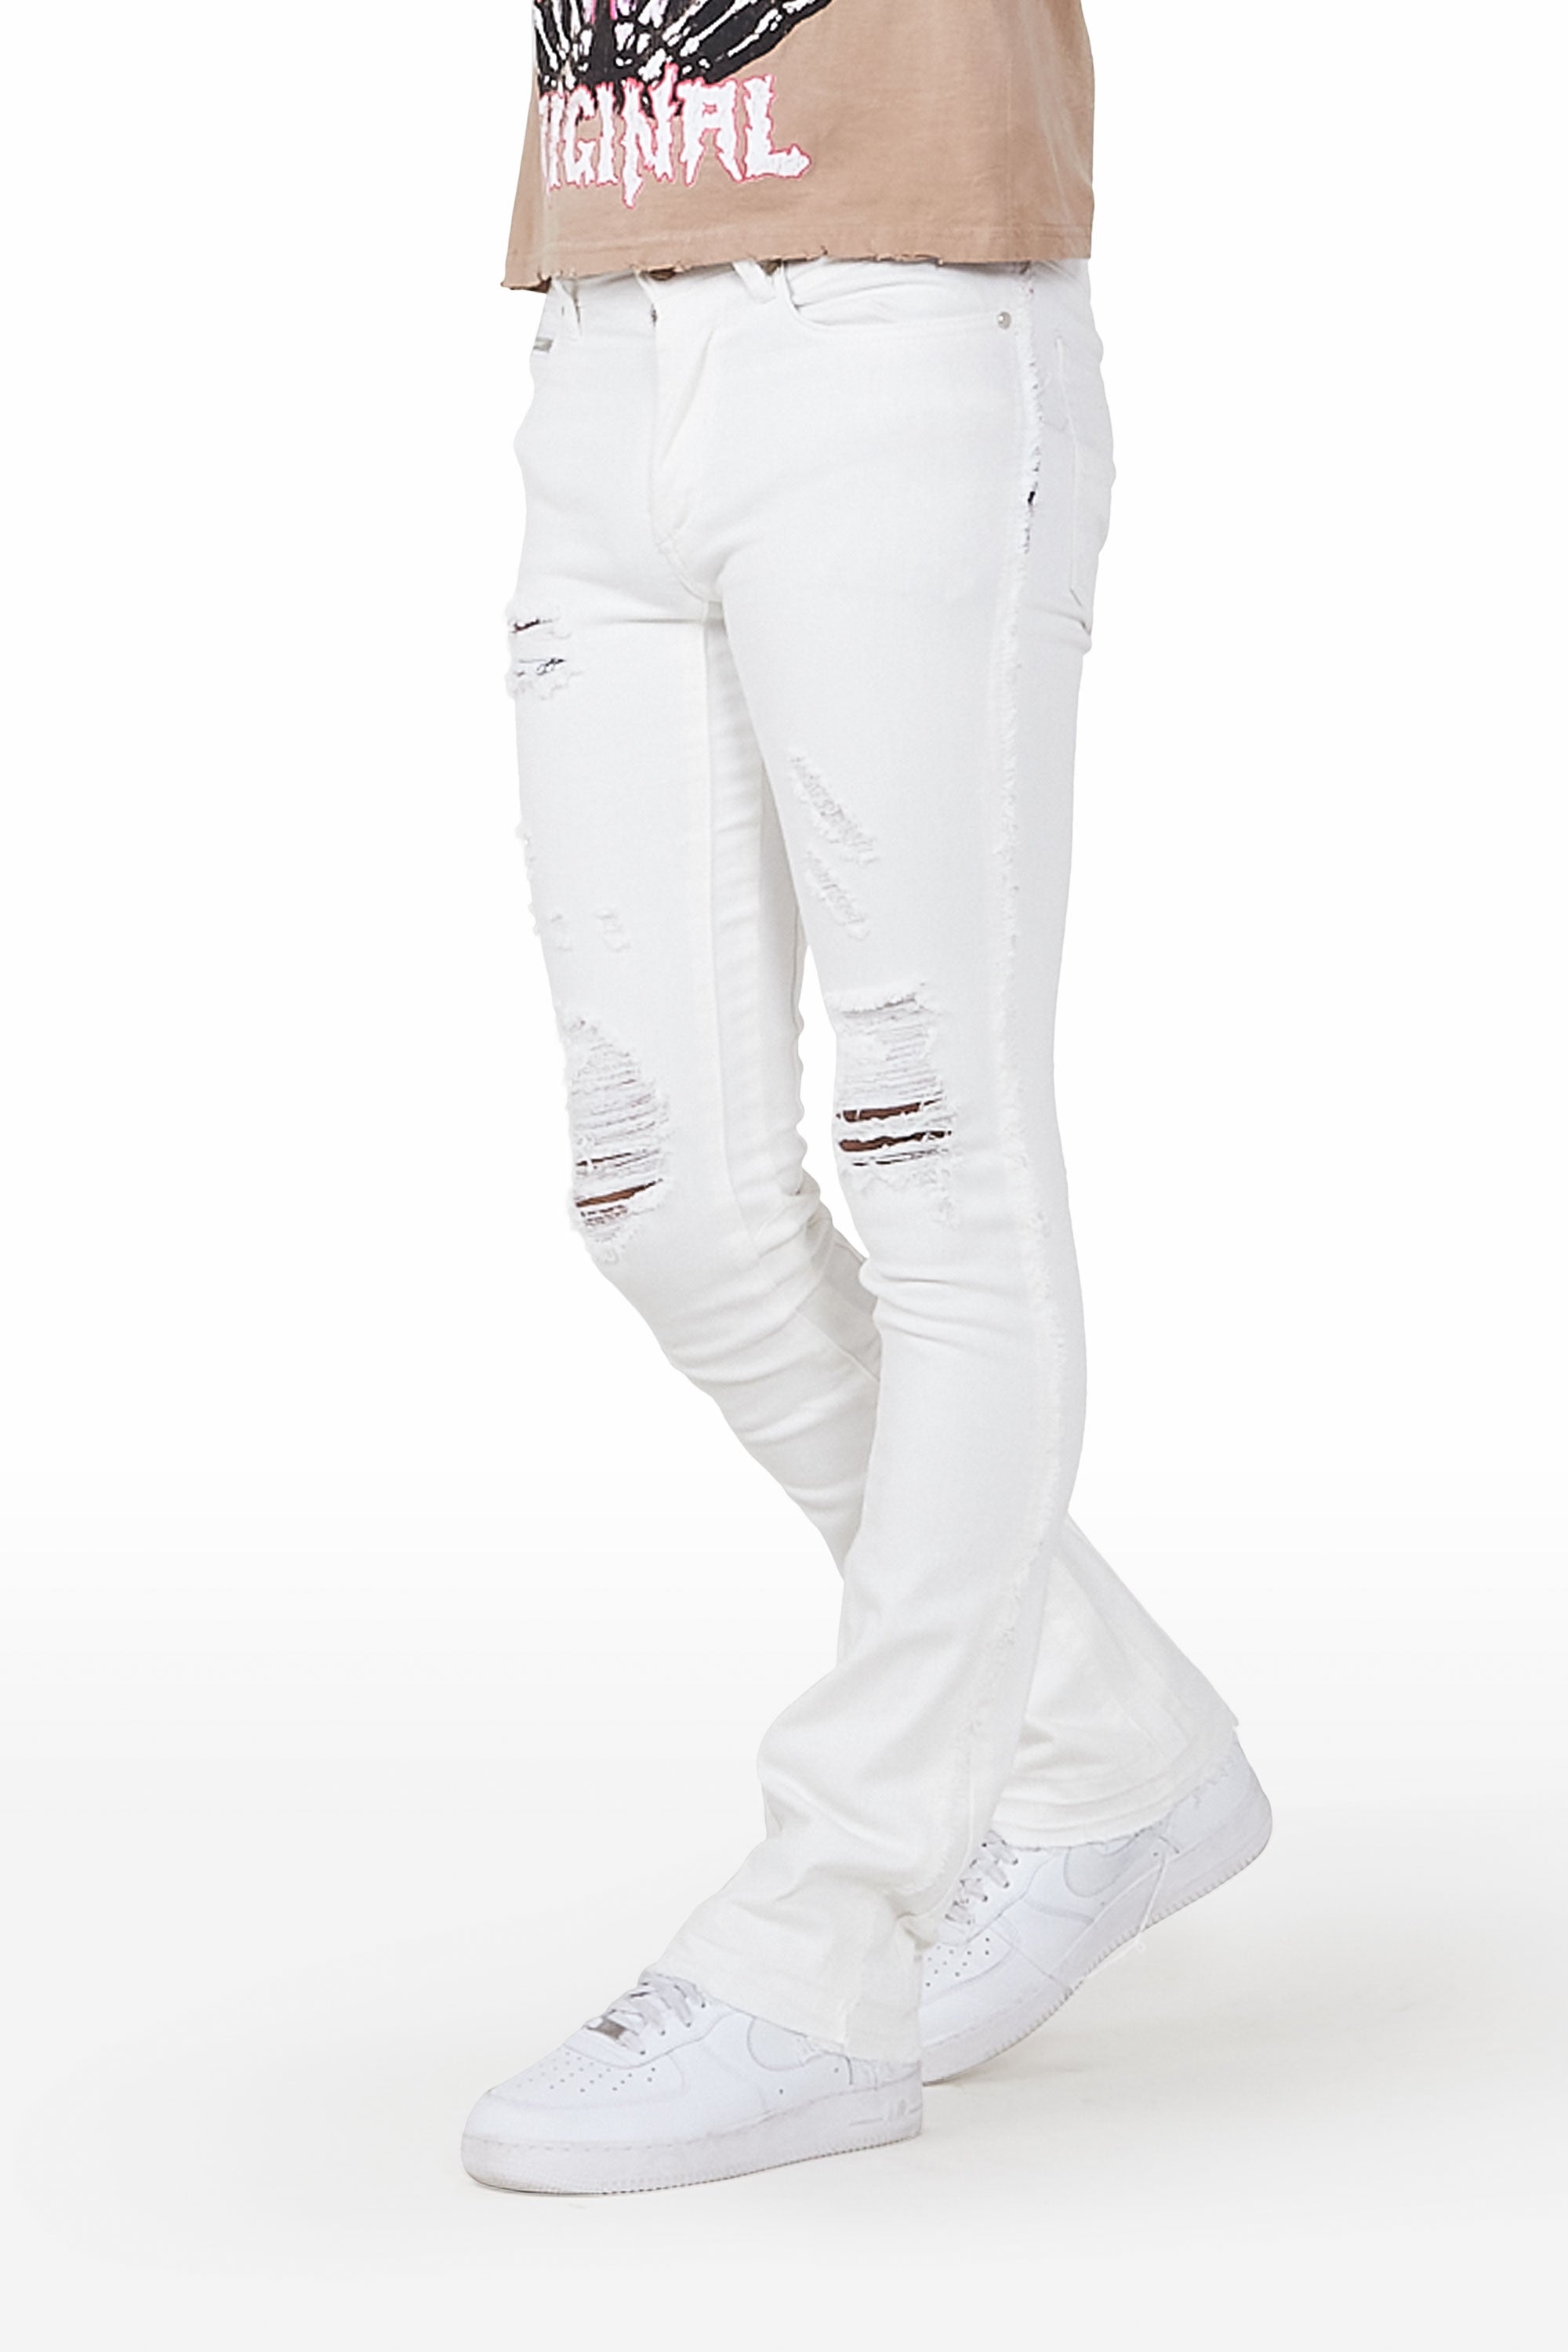 White Skinny Ripped Jeans with 20 Gold Chains, Rayarrips — RayarJeans